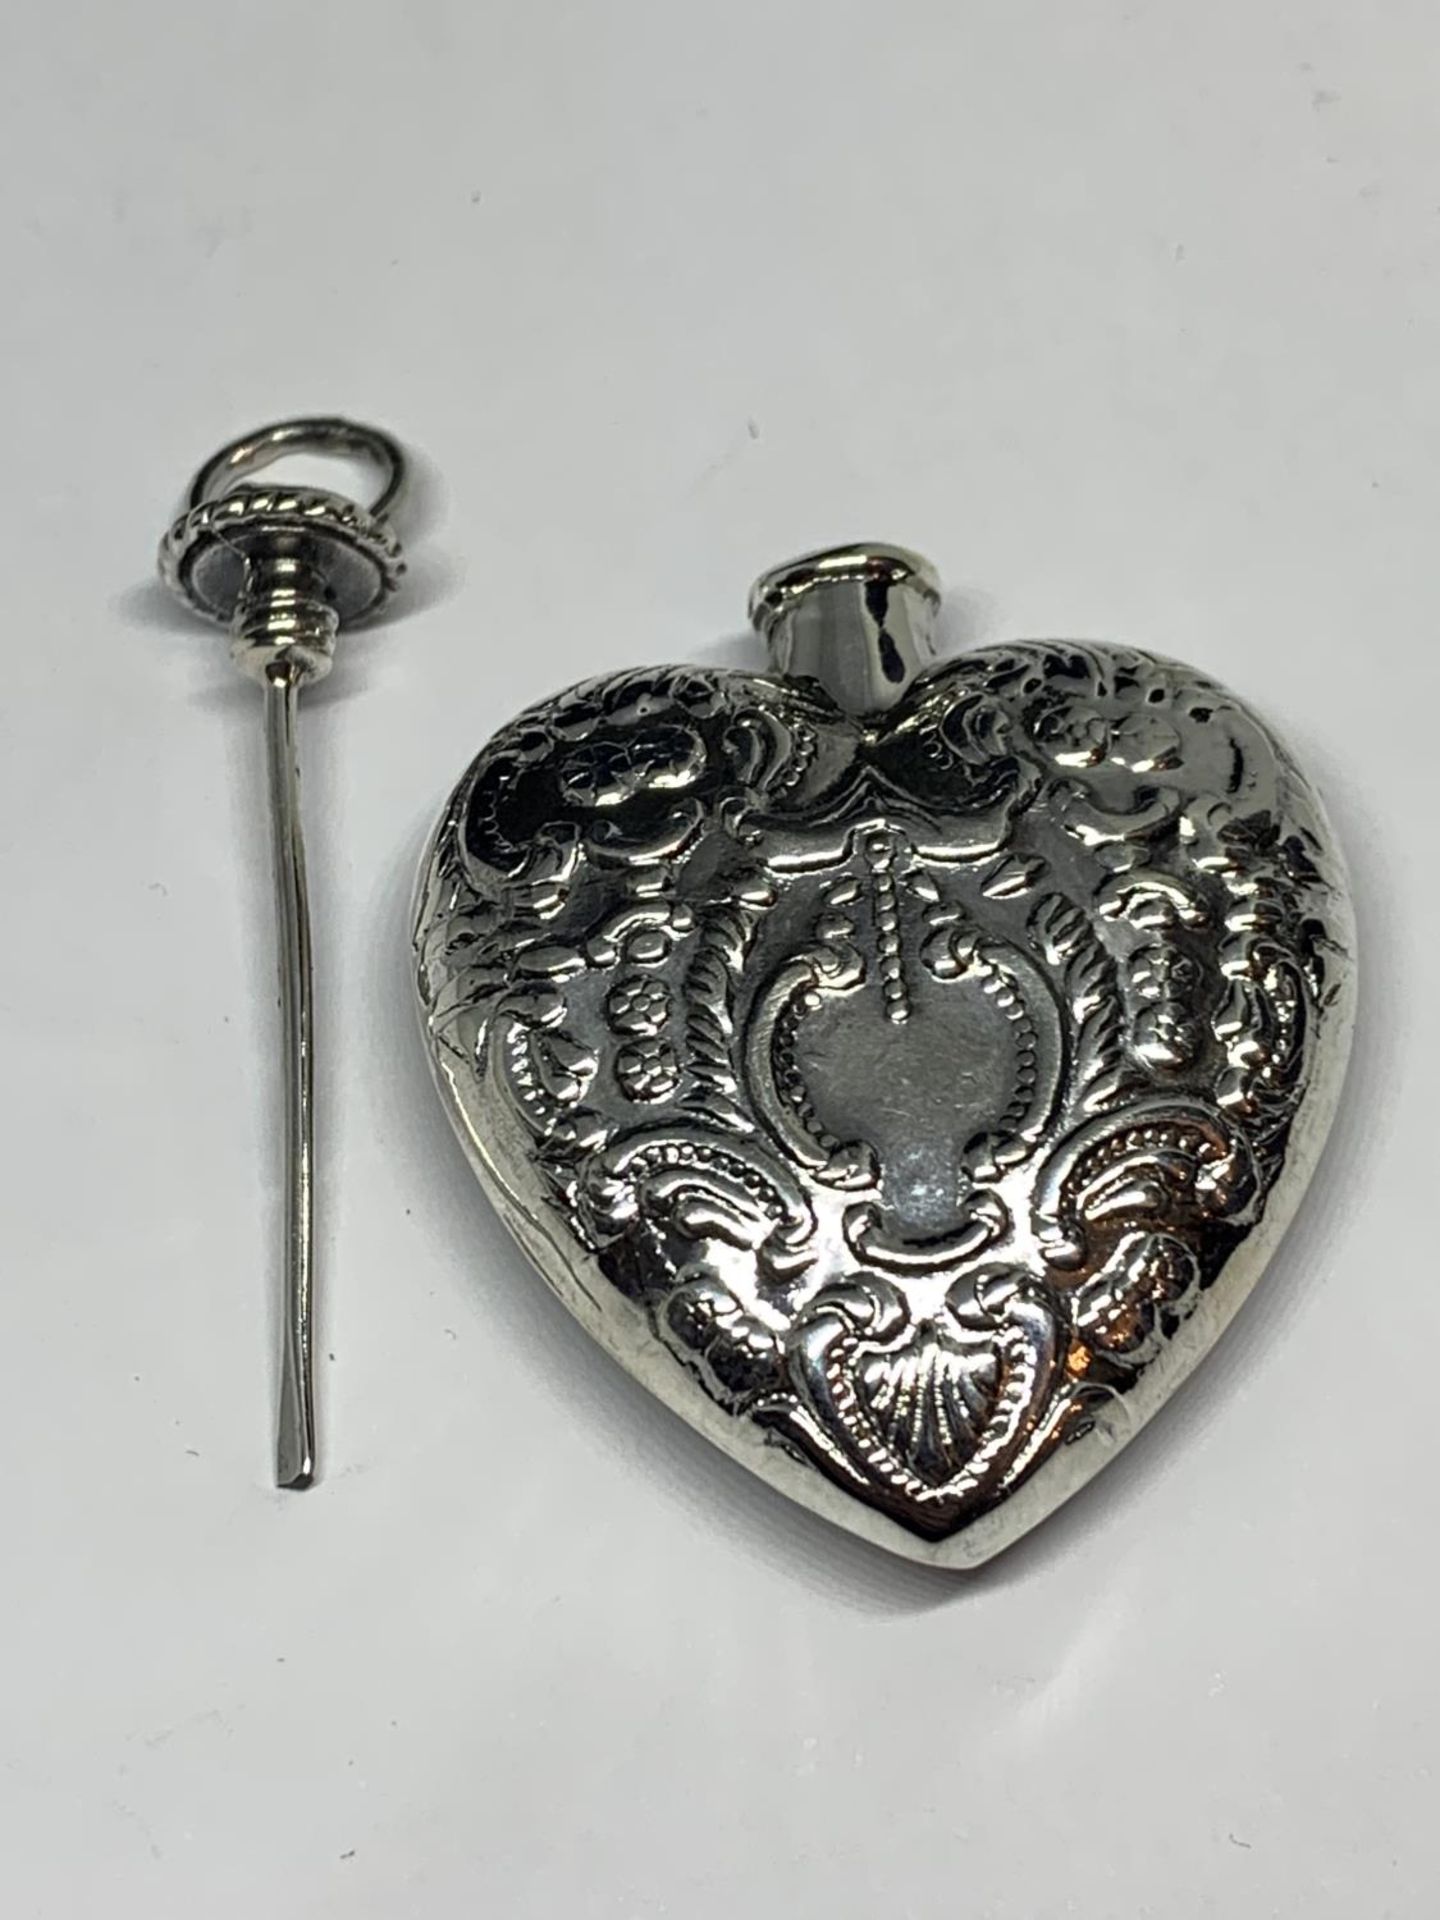 A MARKED SILVER HEART SHAPED PERFUME BOTTLE PENDANT - Image 2 of 2